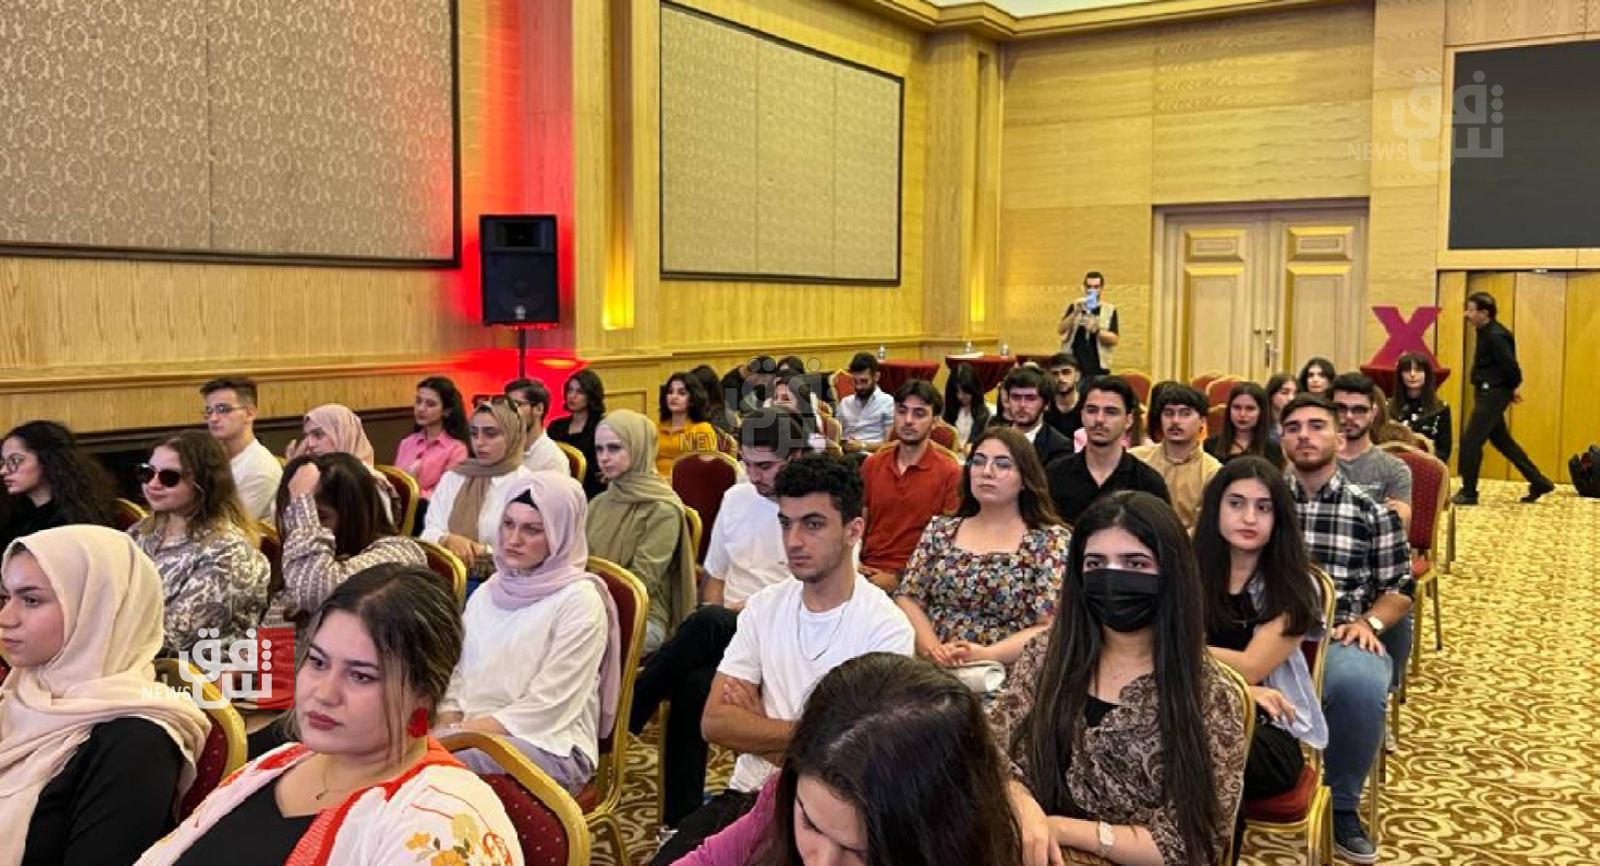 KRG representative fighting drug abuse and unemployment among youth is a priority